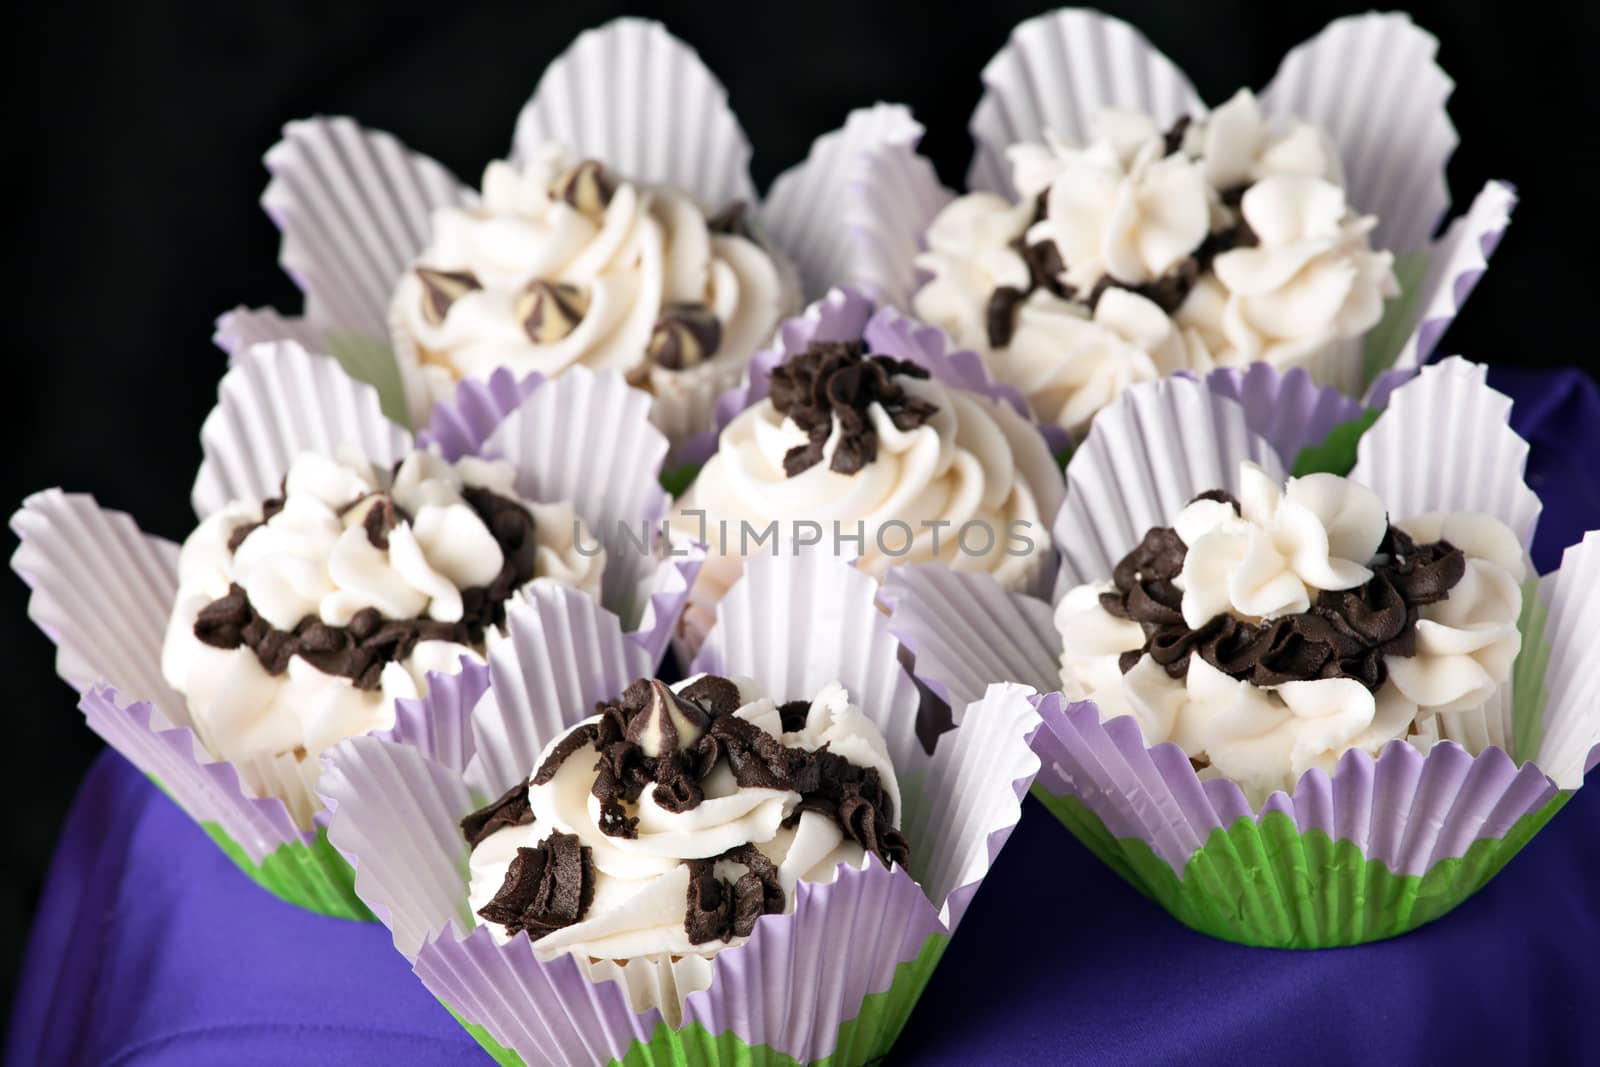 Delicious Gourmet Cupcakes by graficallyminded